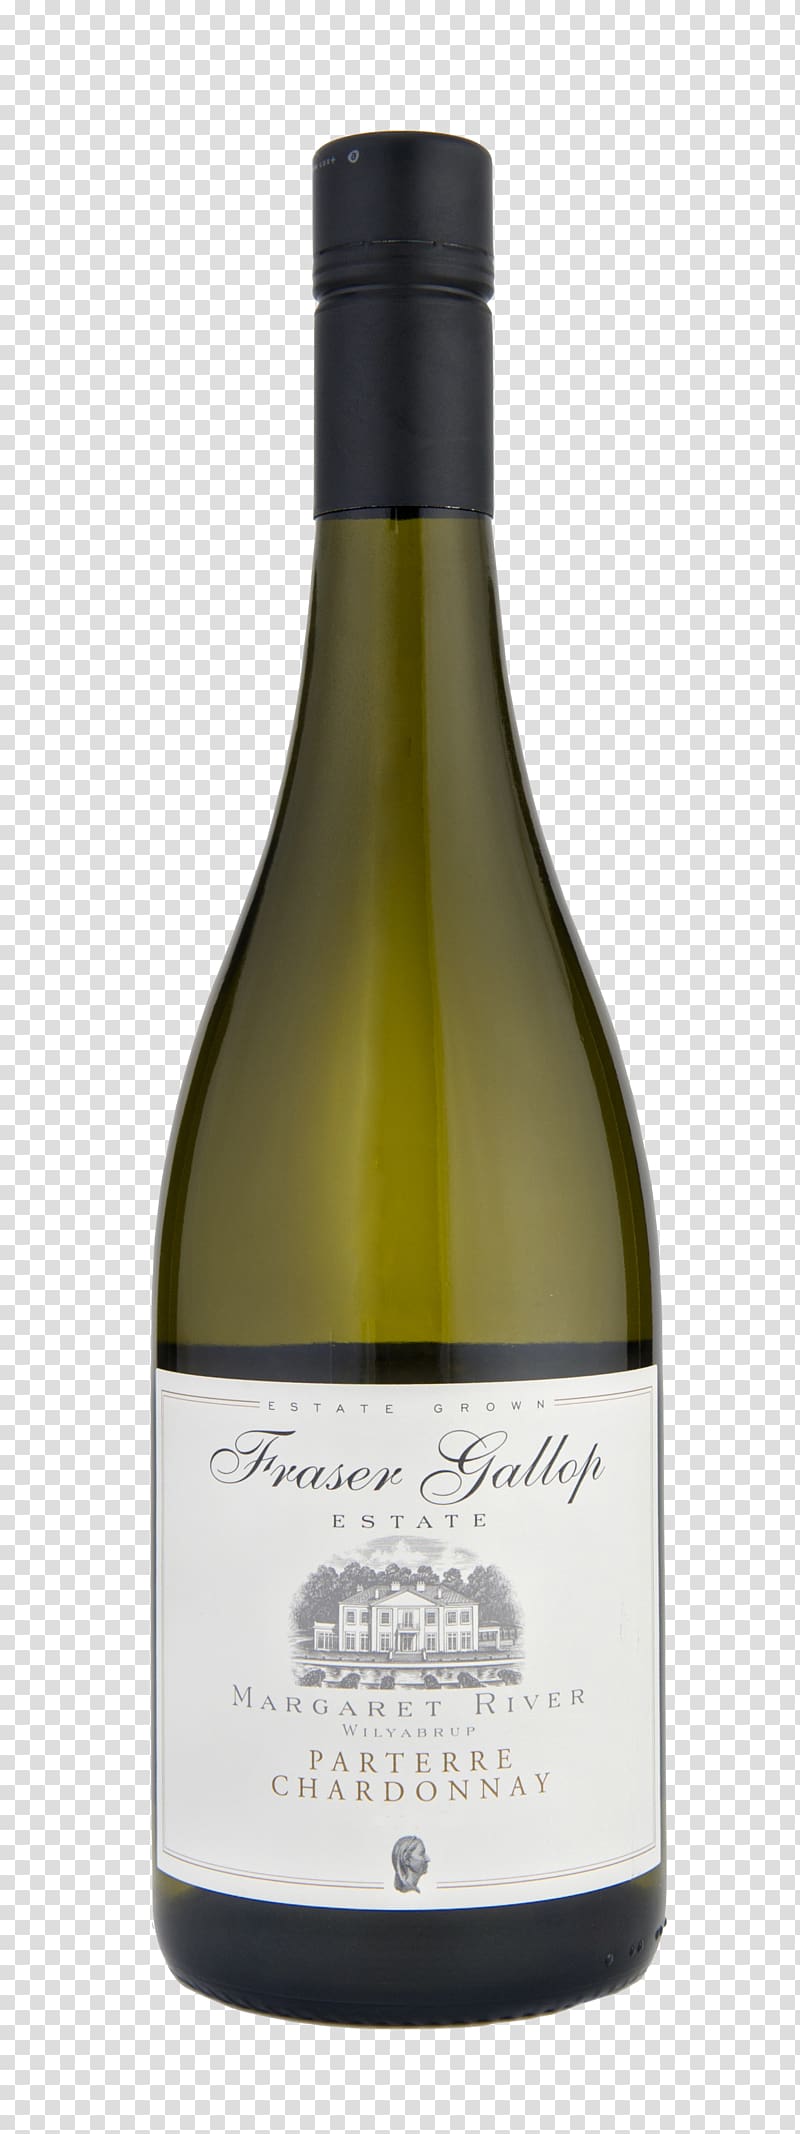 White wine Schloss Vollrads Riesling Viognier, wine transparent background PNG clipart